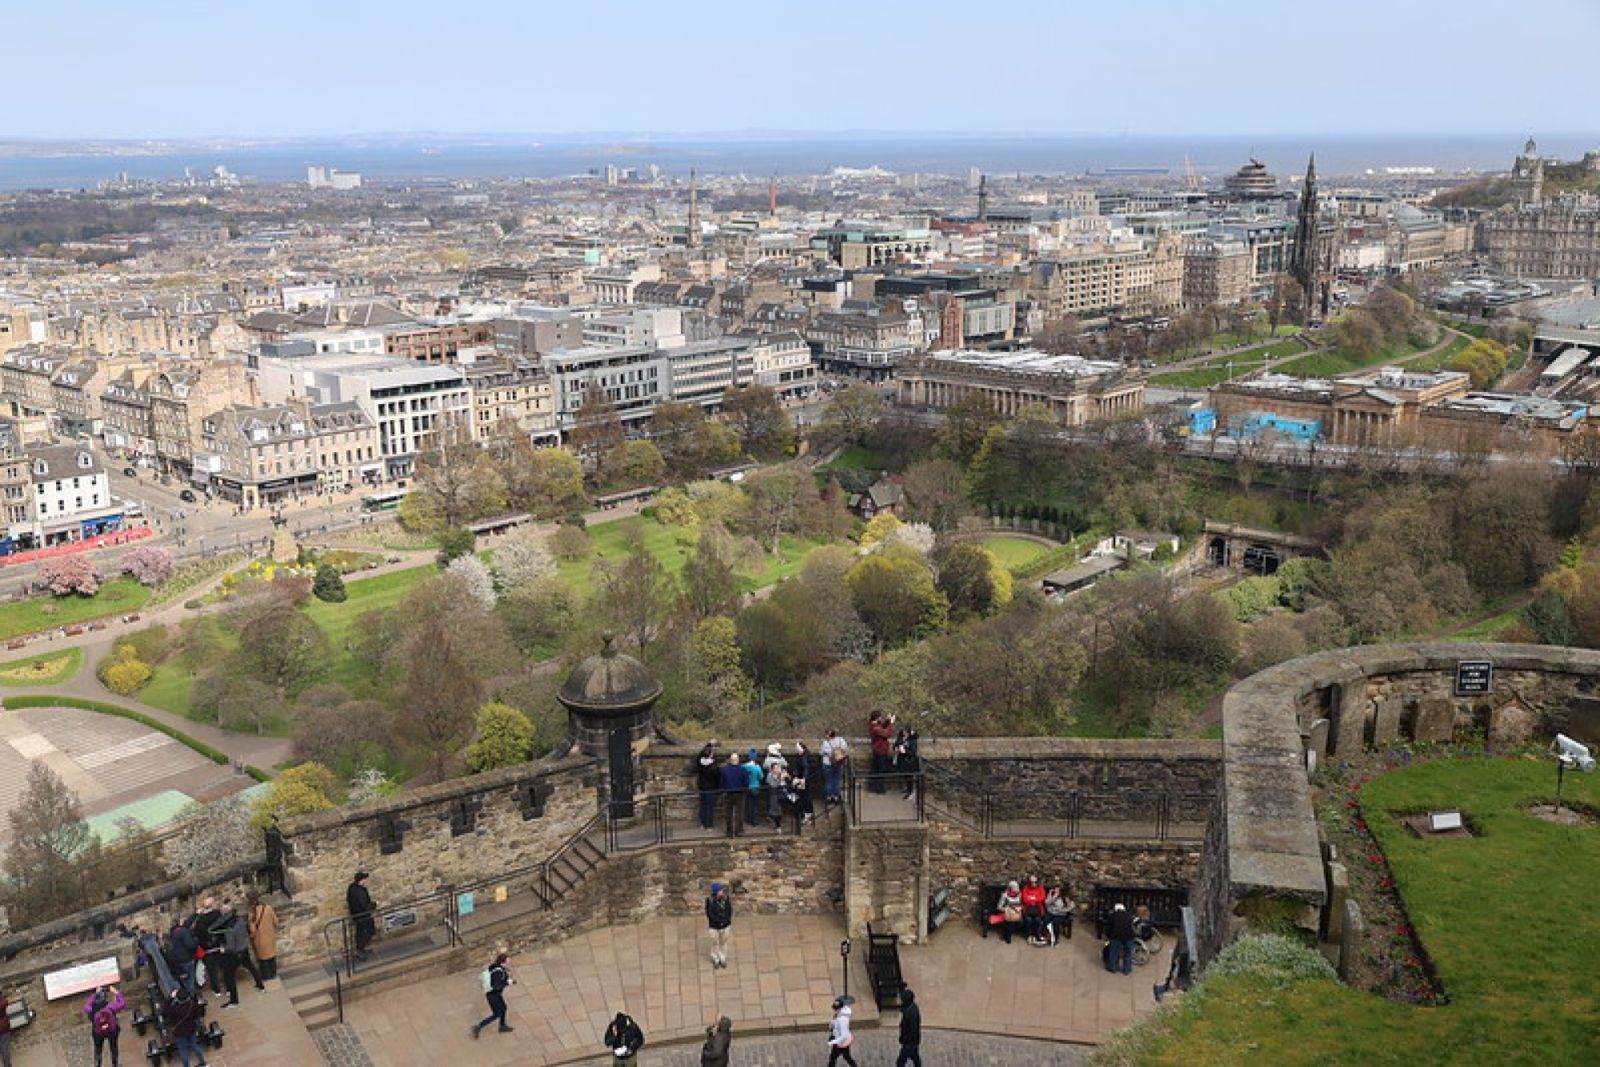 Panoramic views of the city from the castle